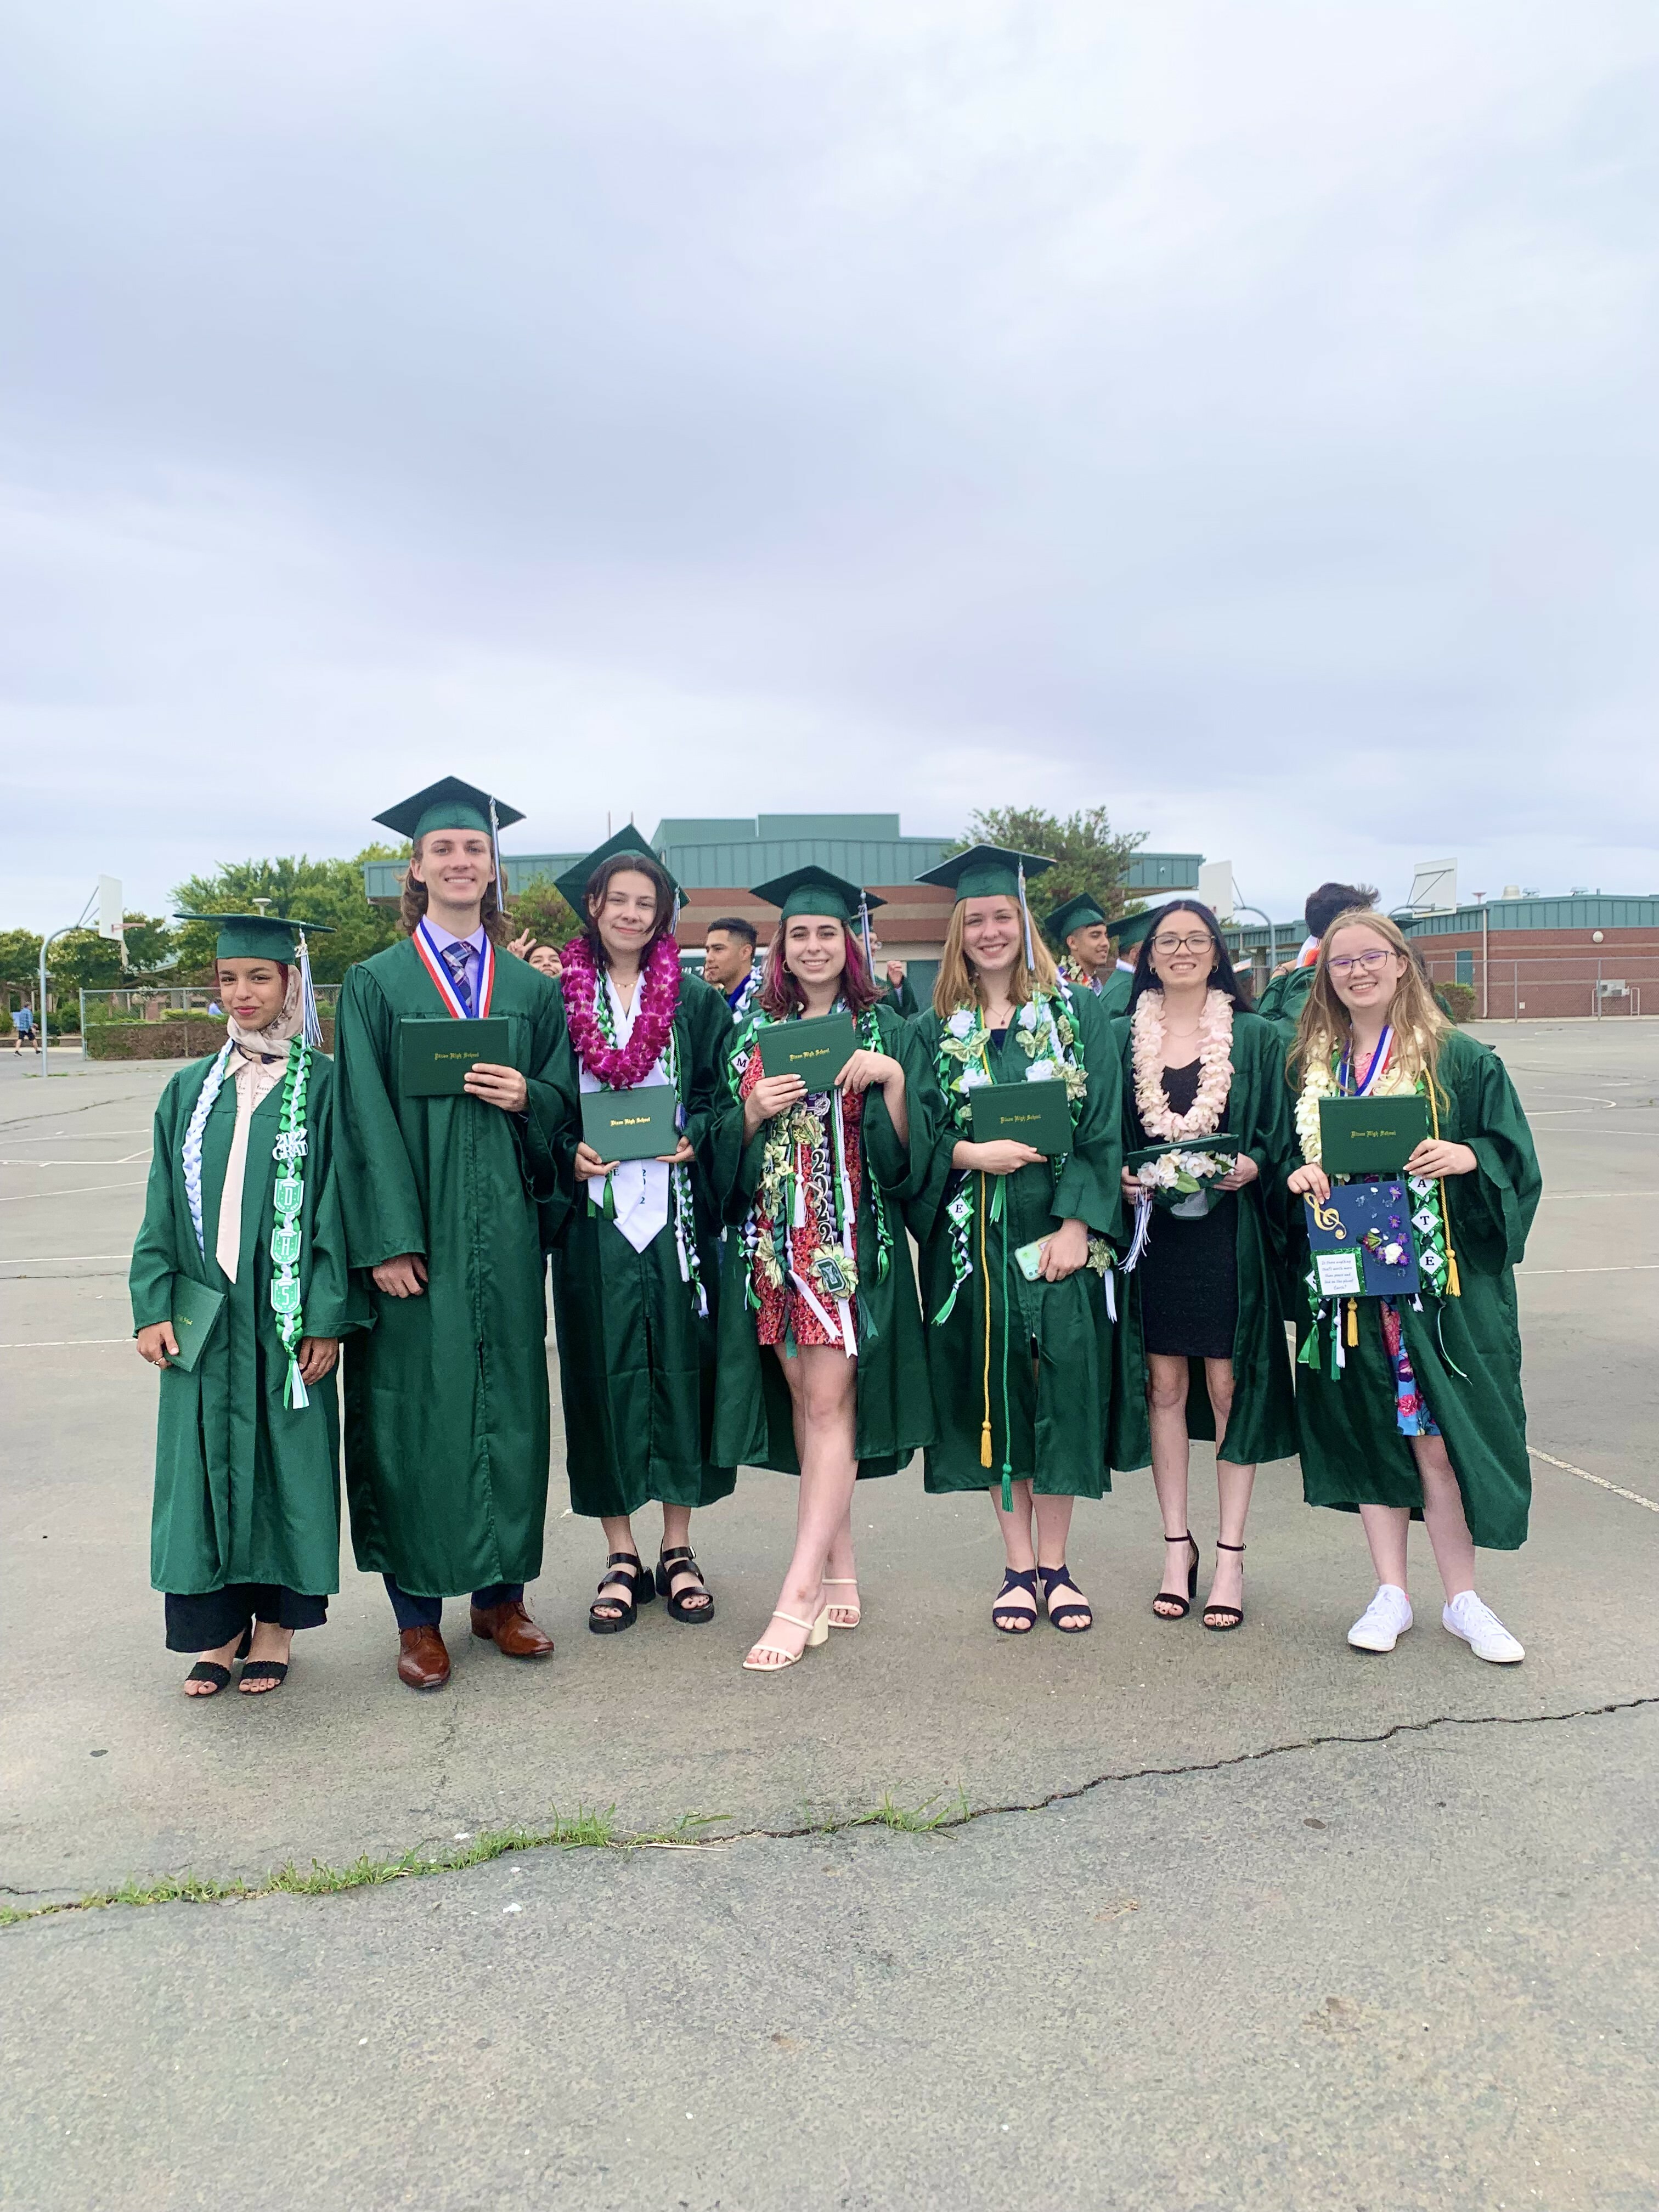 A group of high school students in green graduation regalia